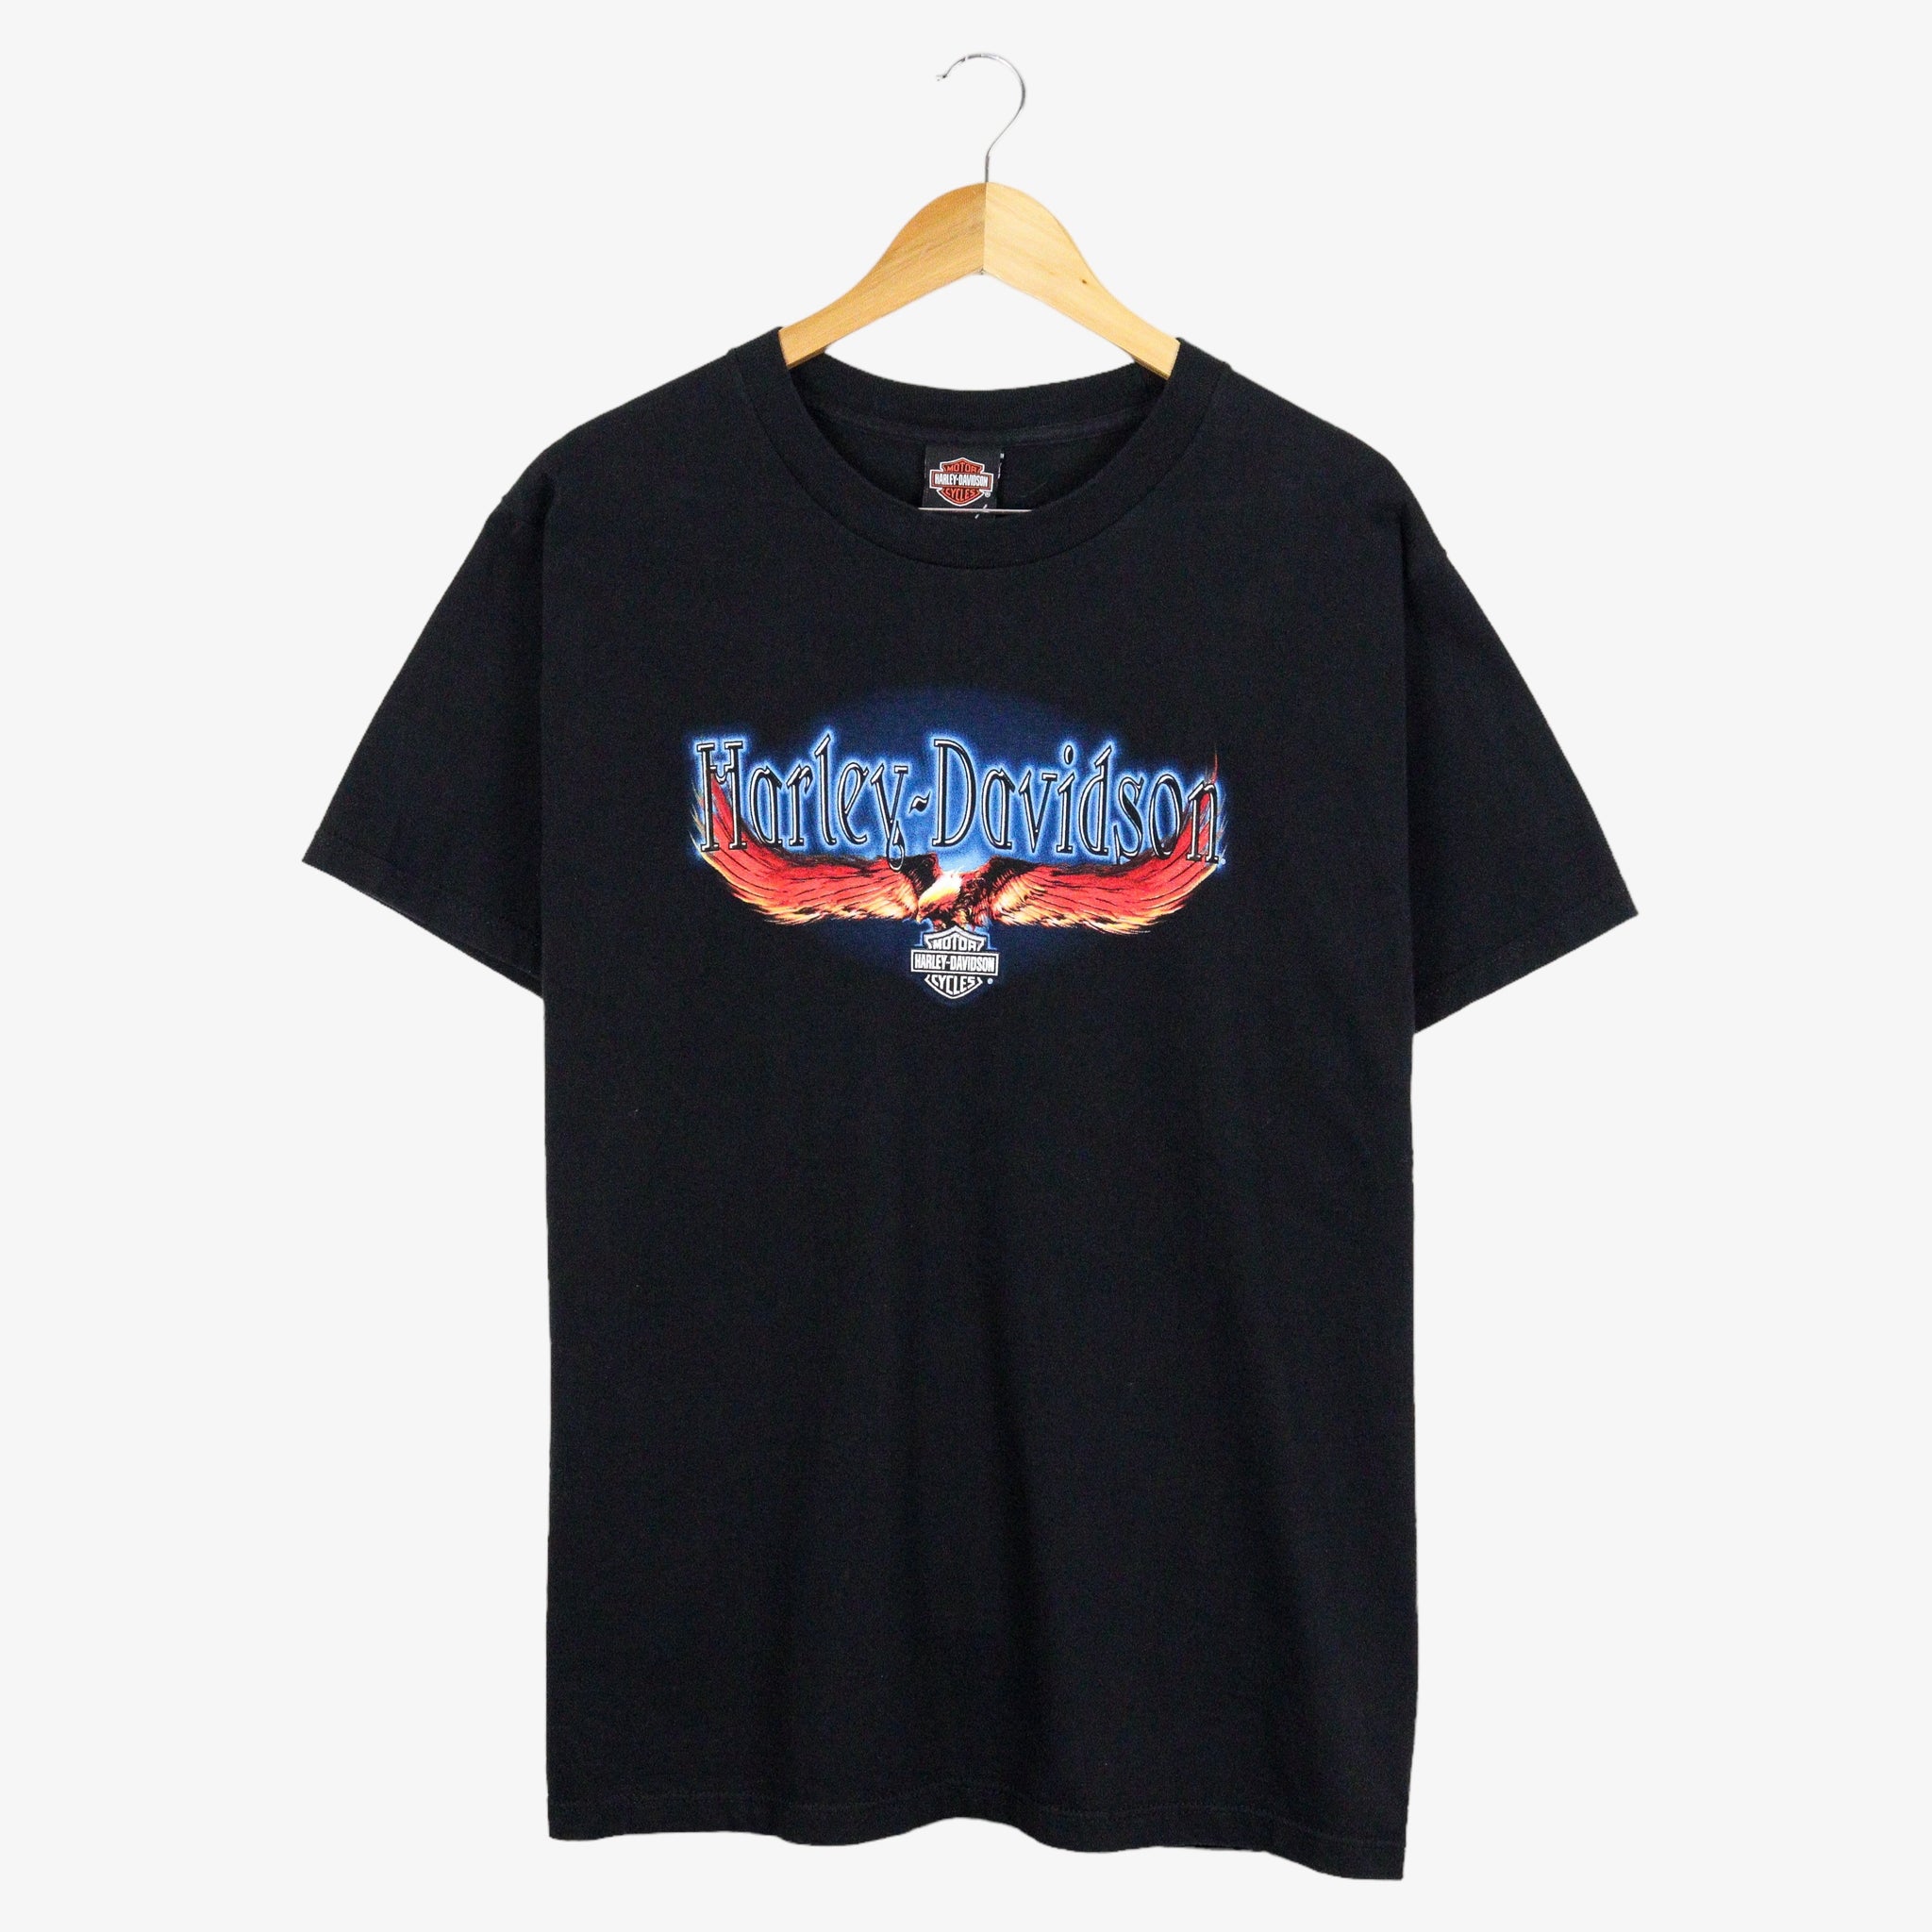 Harley Davidson New Berlin Eagle Graphic SS-Tee (L)